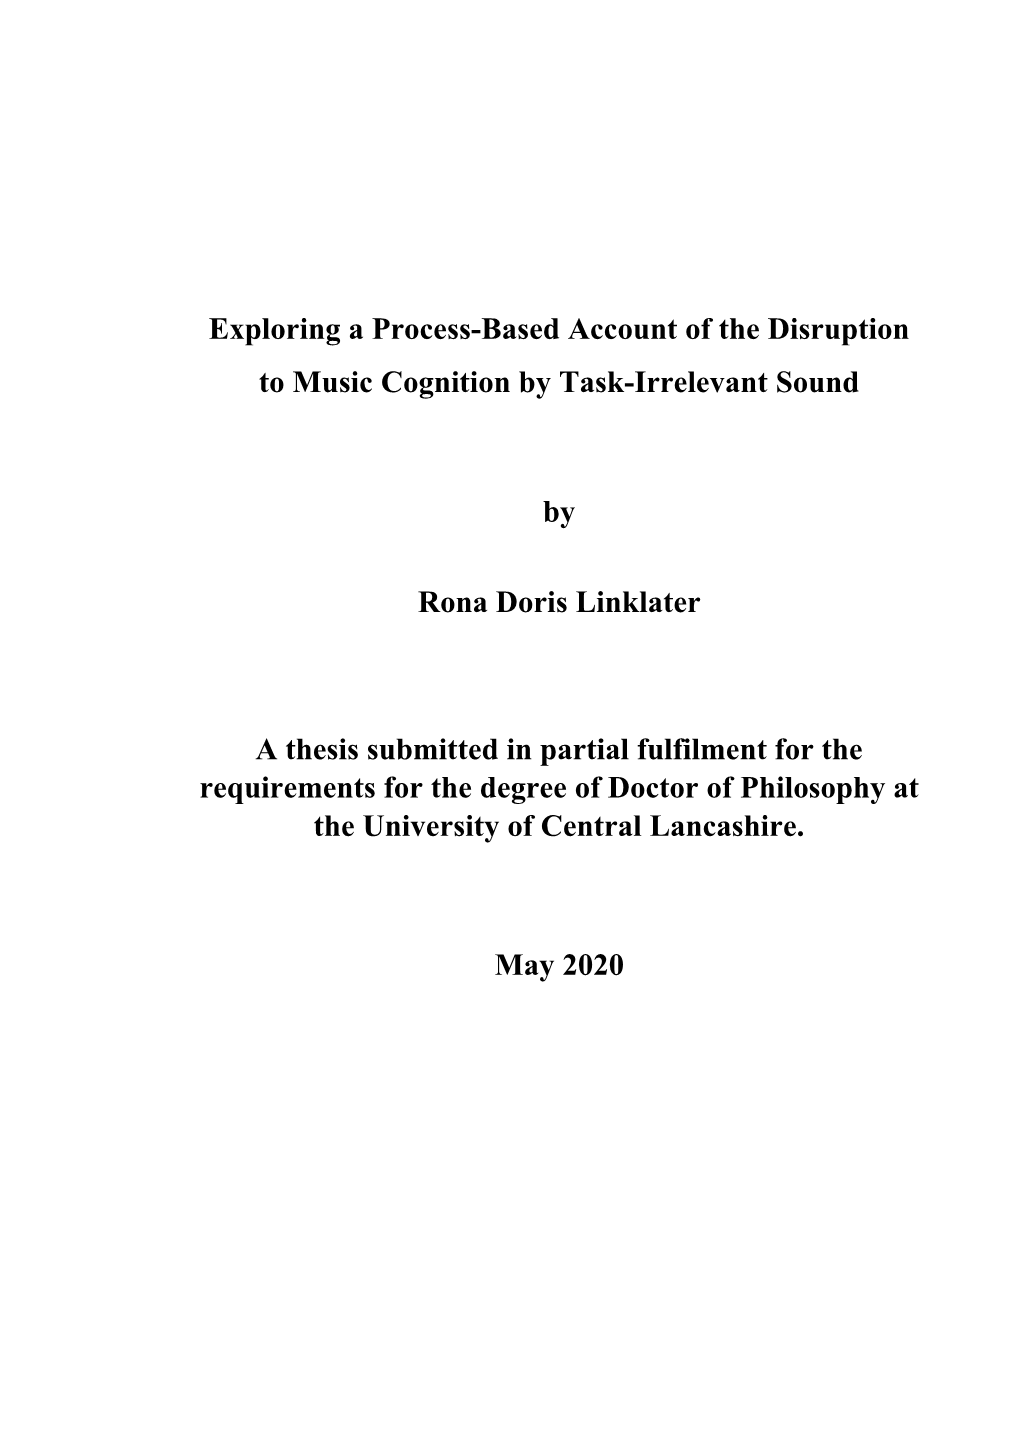 Exploring a Process-Based Account of the Disruption to Music Cognition by Task-Irrelevant Sound